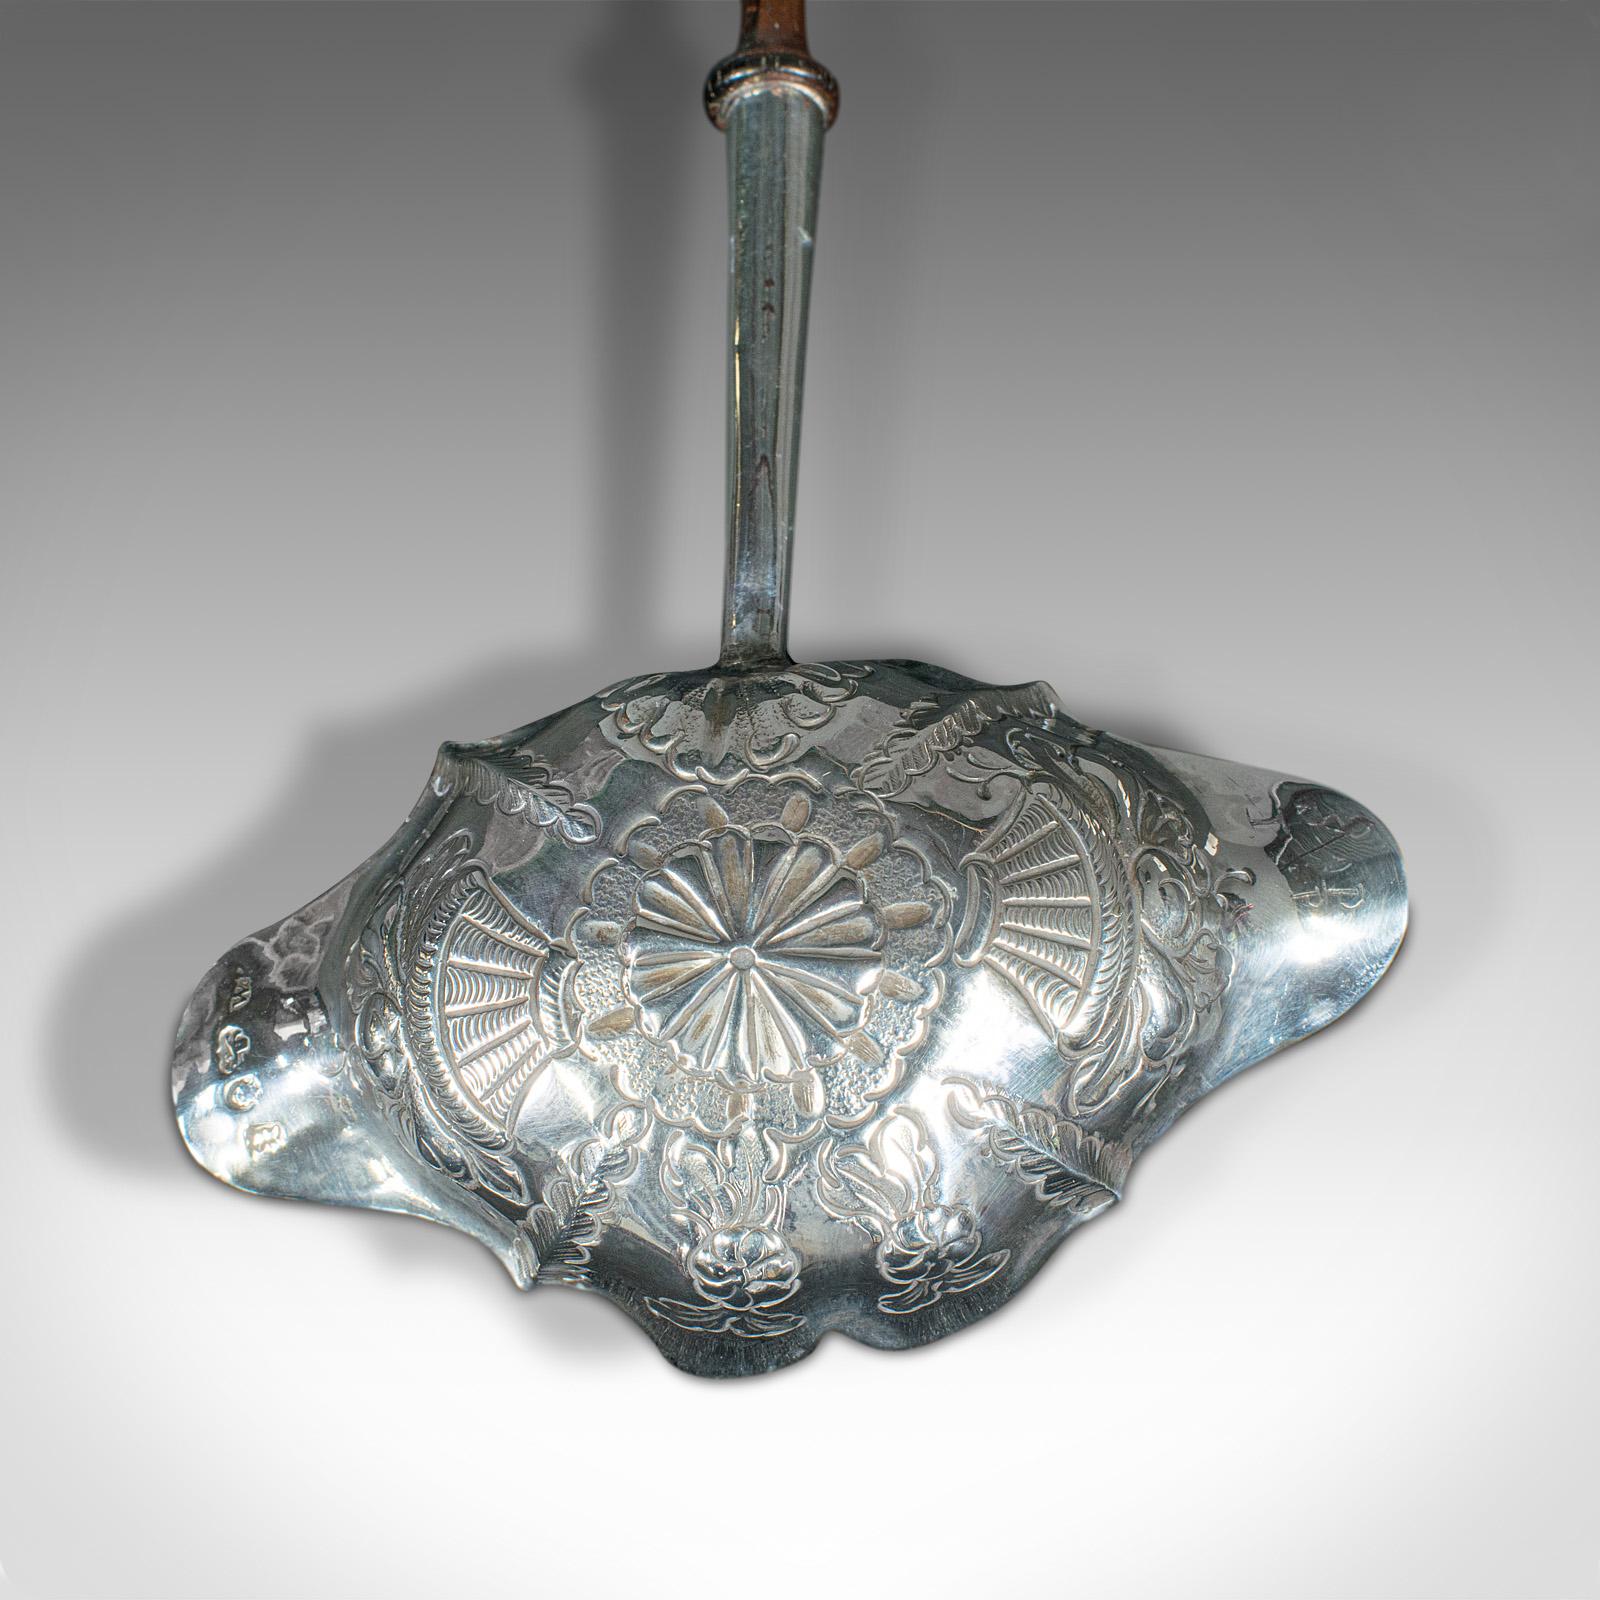 Antique Toddy Spoon, English, Silver, Serving Ladle, William Kinman, Georgian For Sale 2